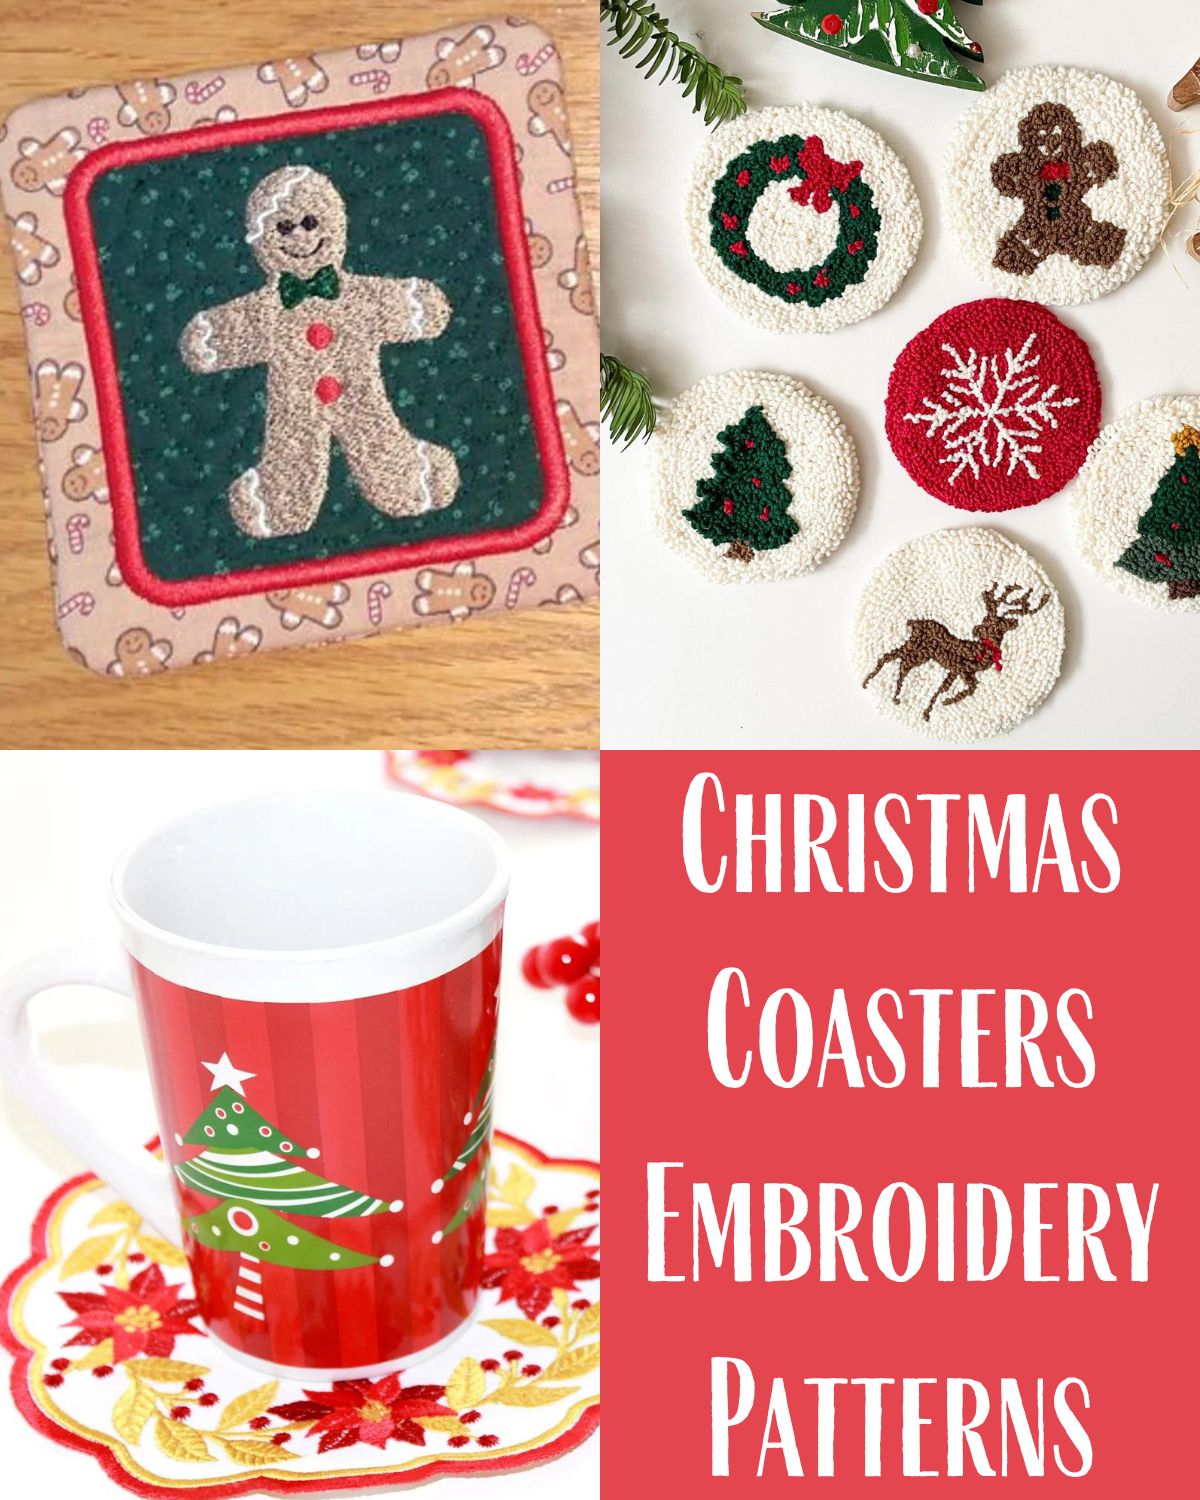 Embroidery patterns for Christmas coasters 